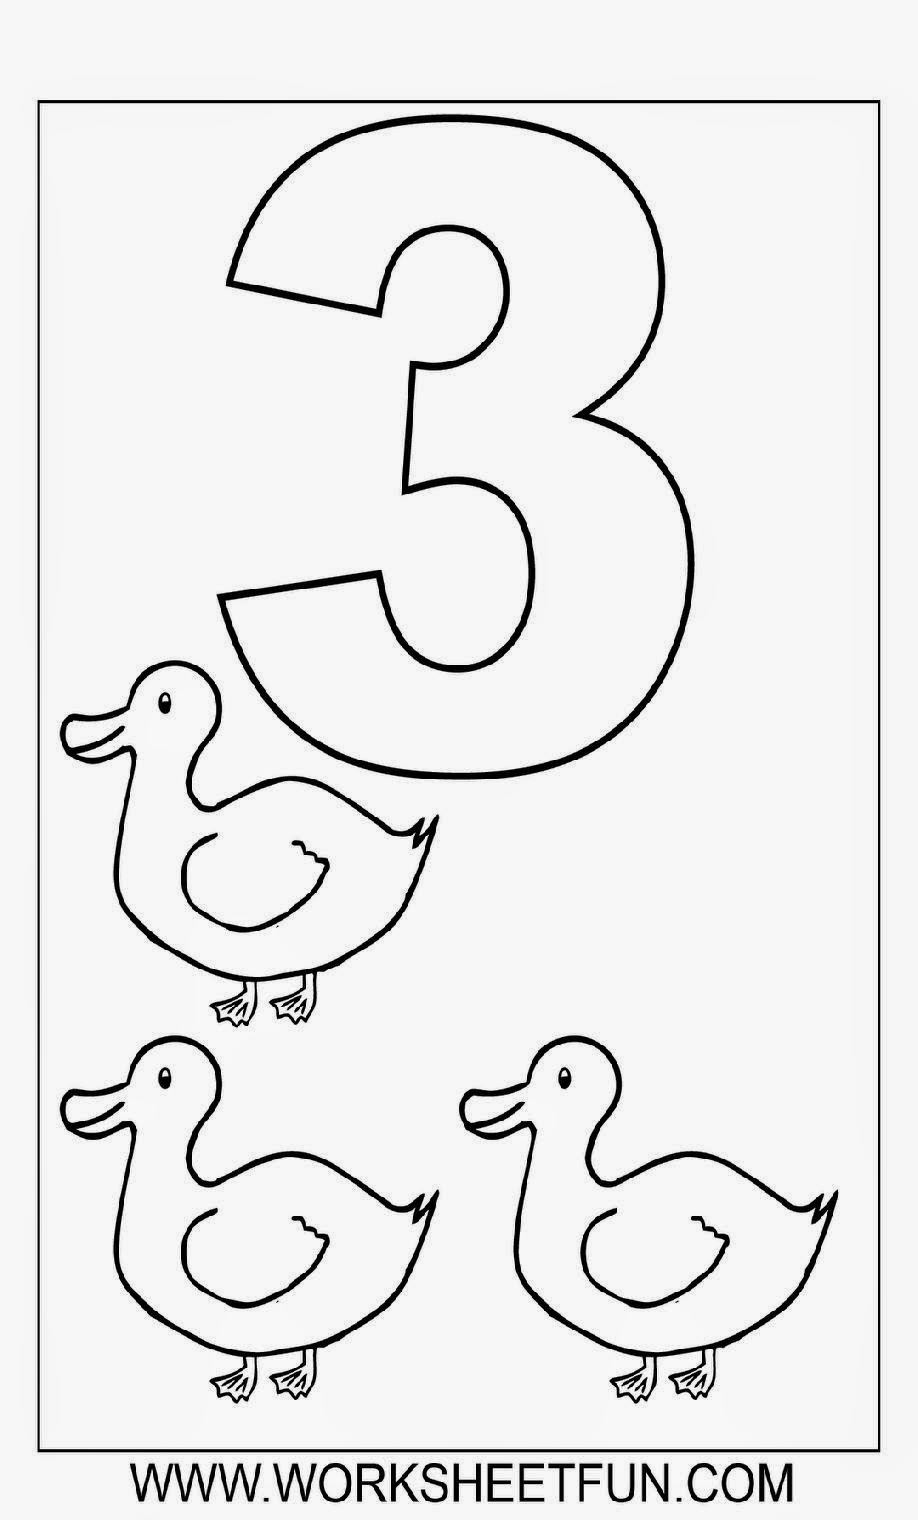 Color By Number Sheets  Free Coloring Sheet